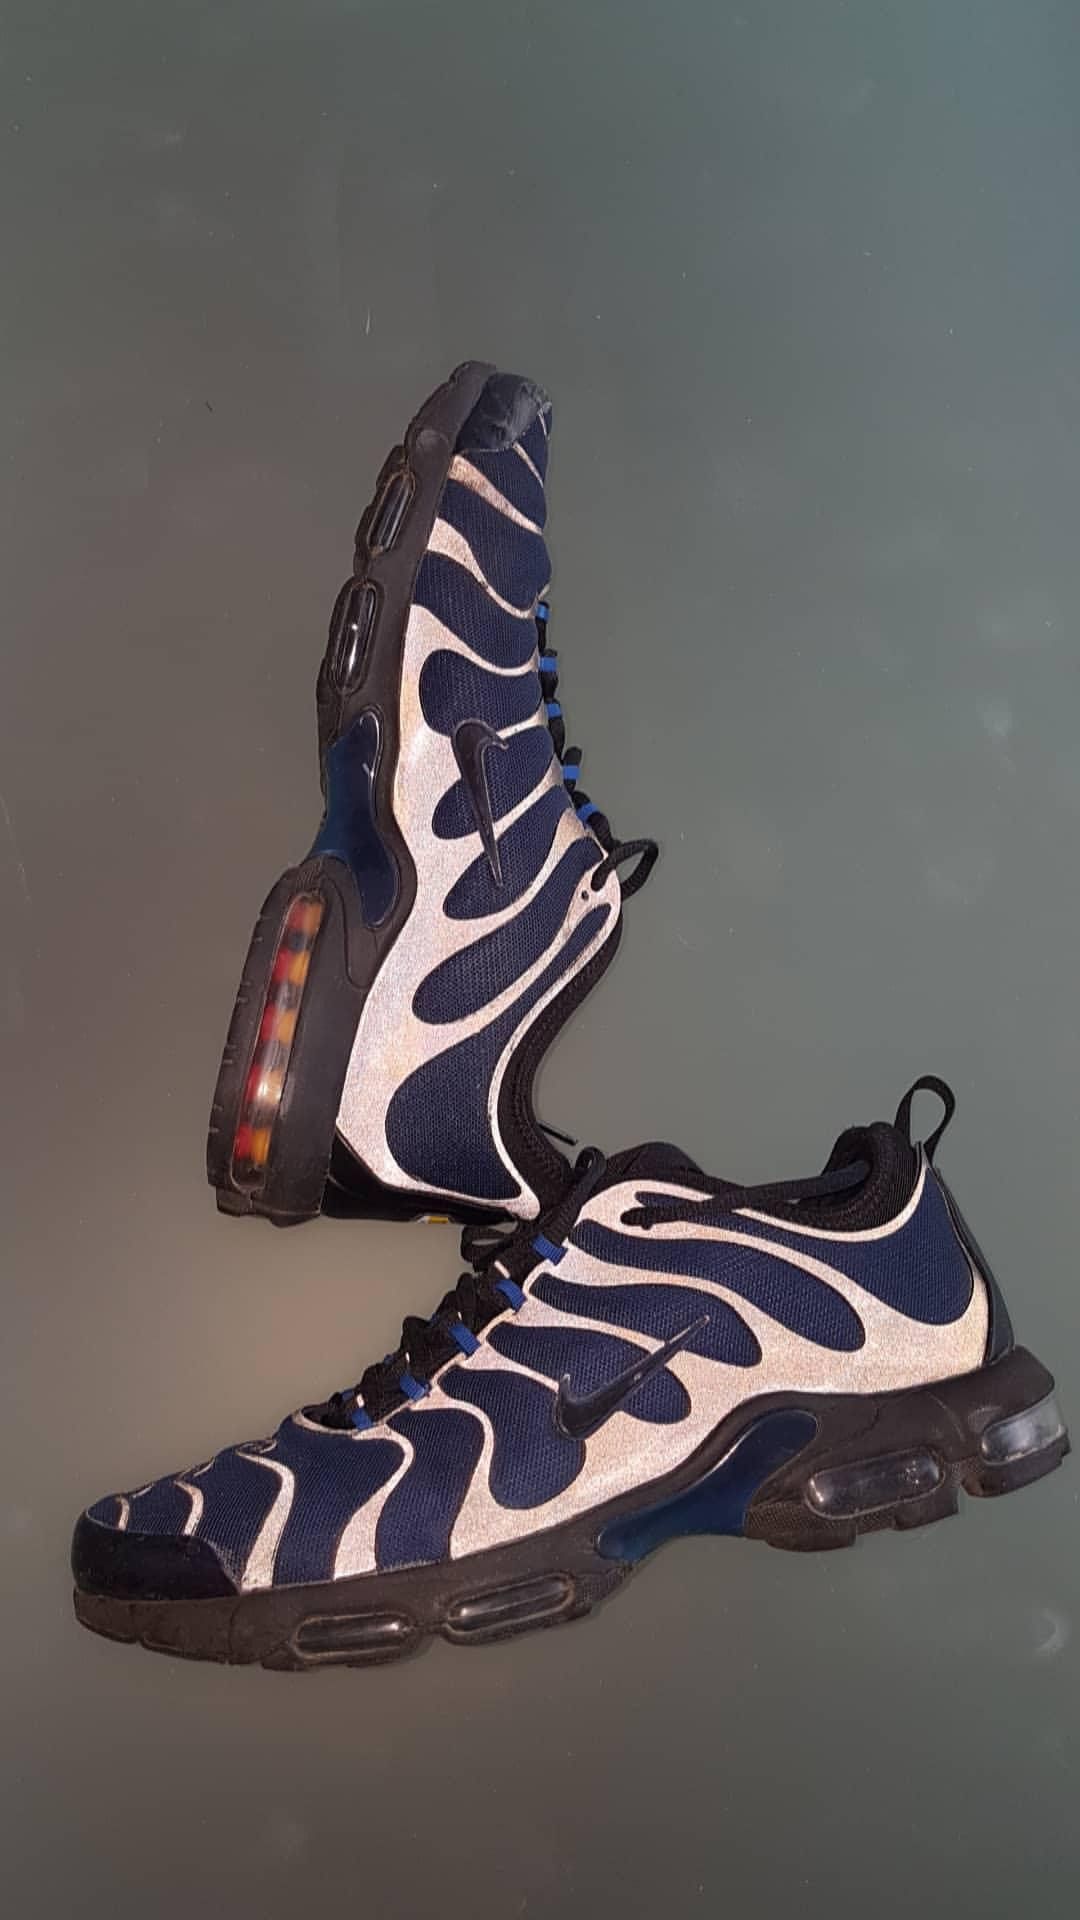 Nike LAST PRICE Nike Air Max Plus Tn Reflective Sneakers Size US 11 / EU 44 - 1 Preview